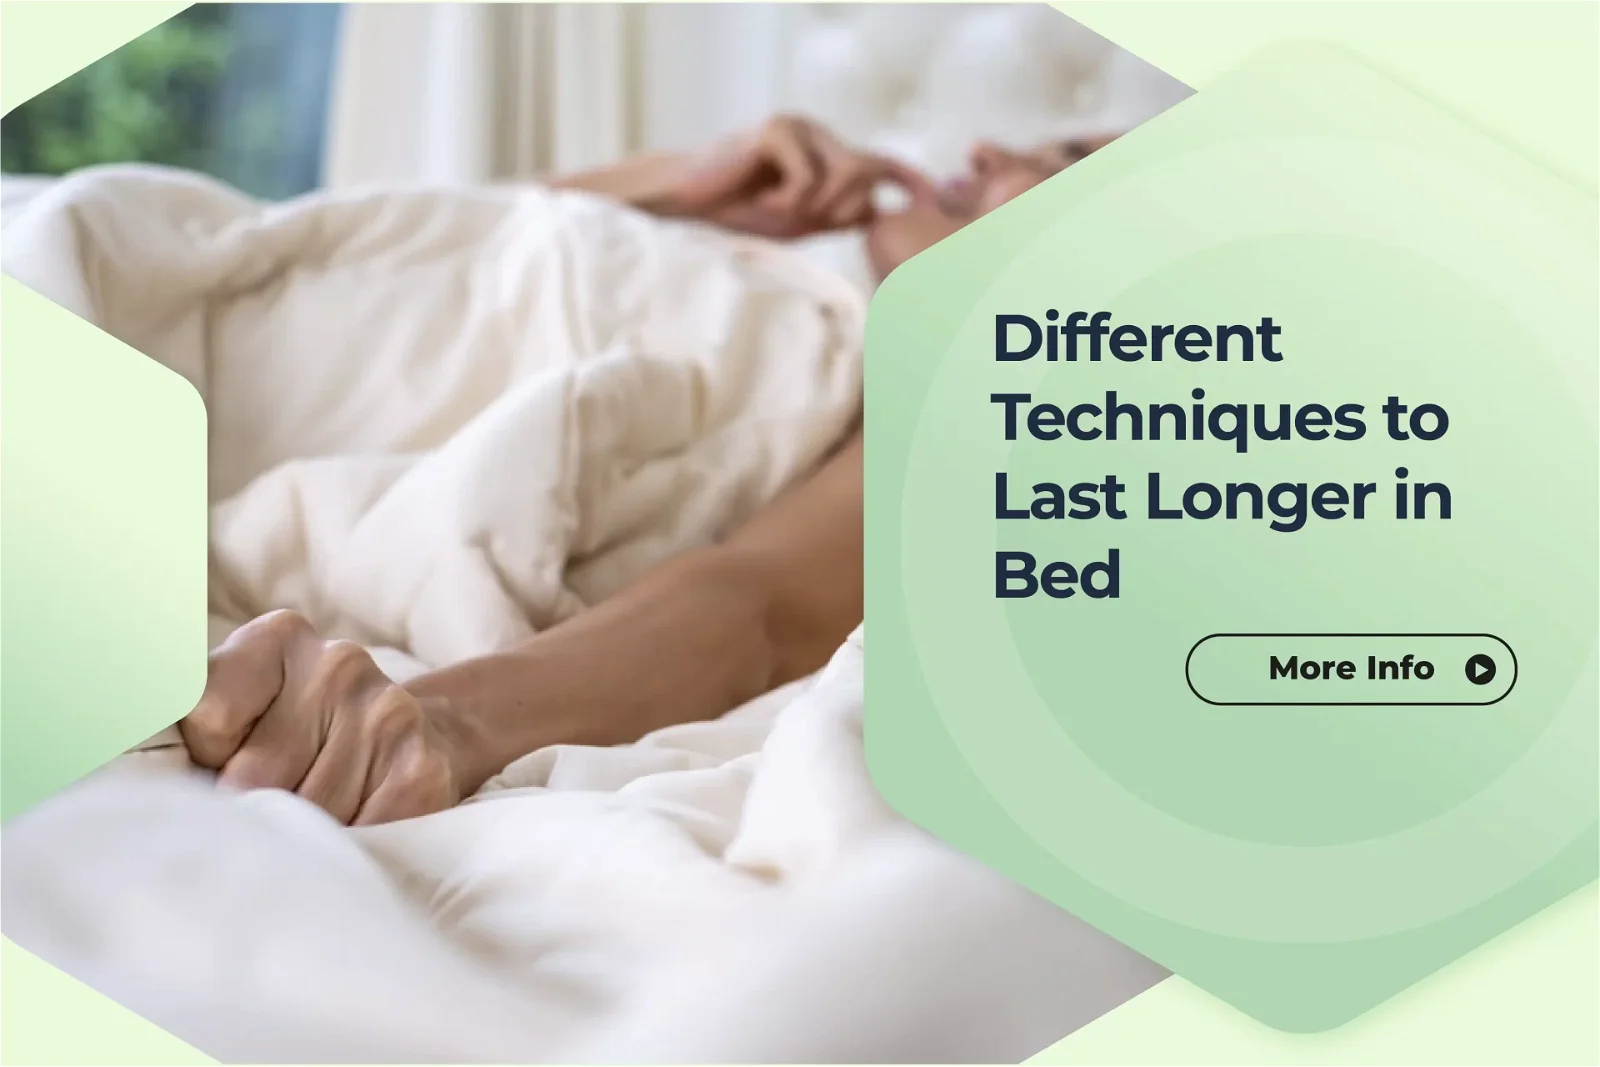 Different techniques to Last Longer in Bed